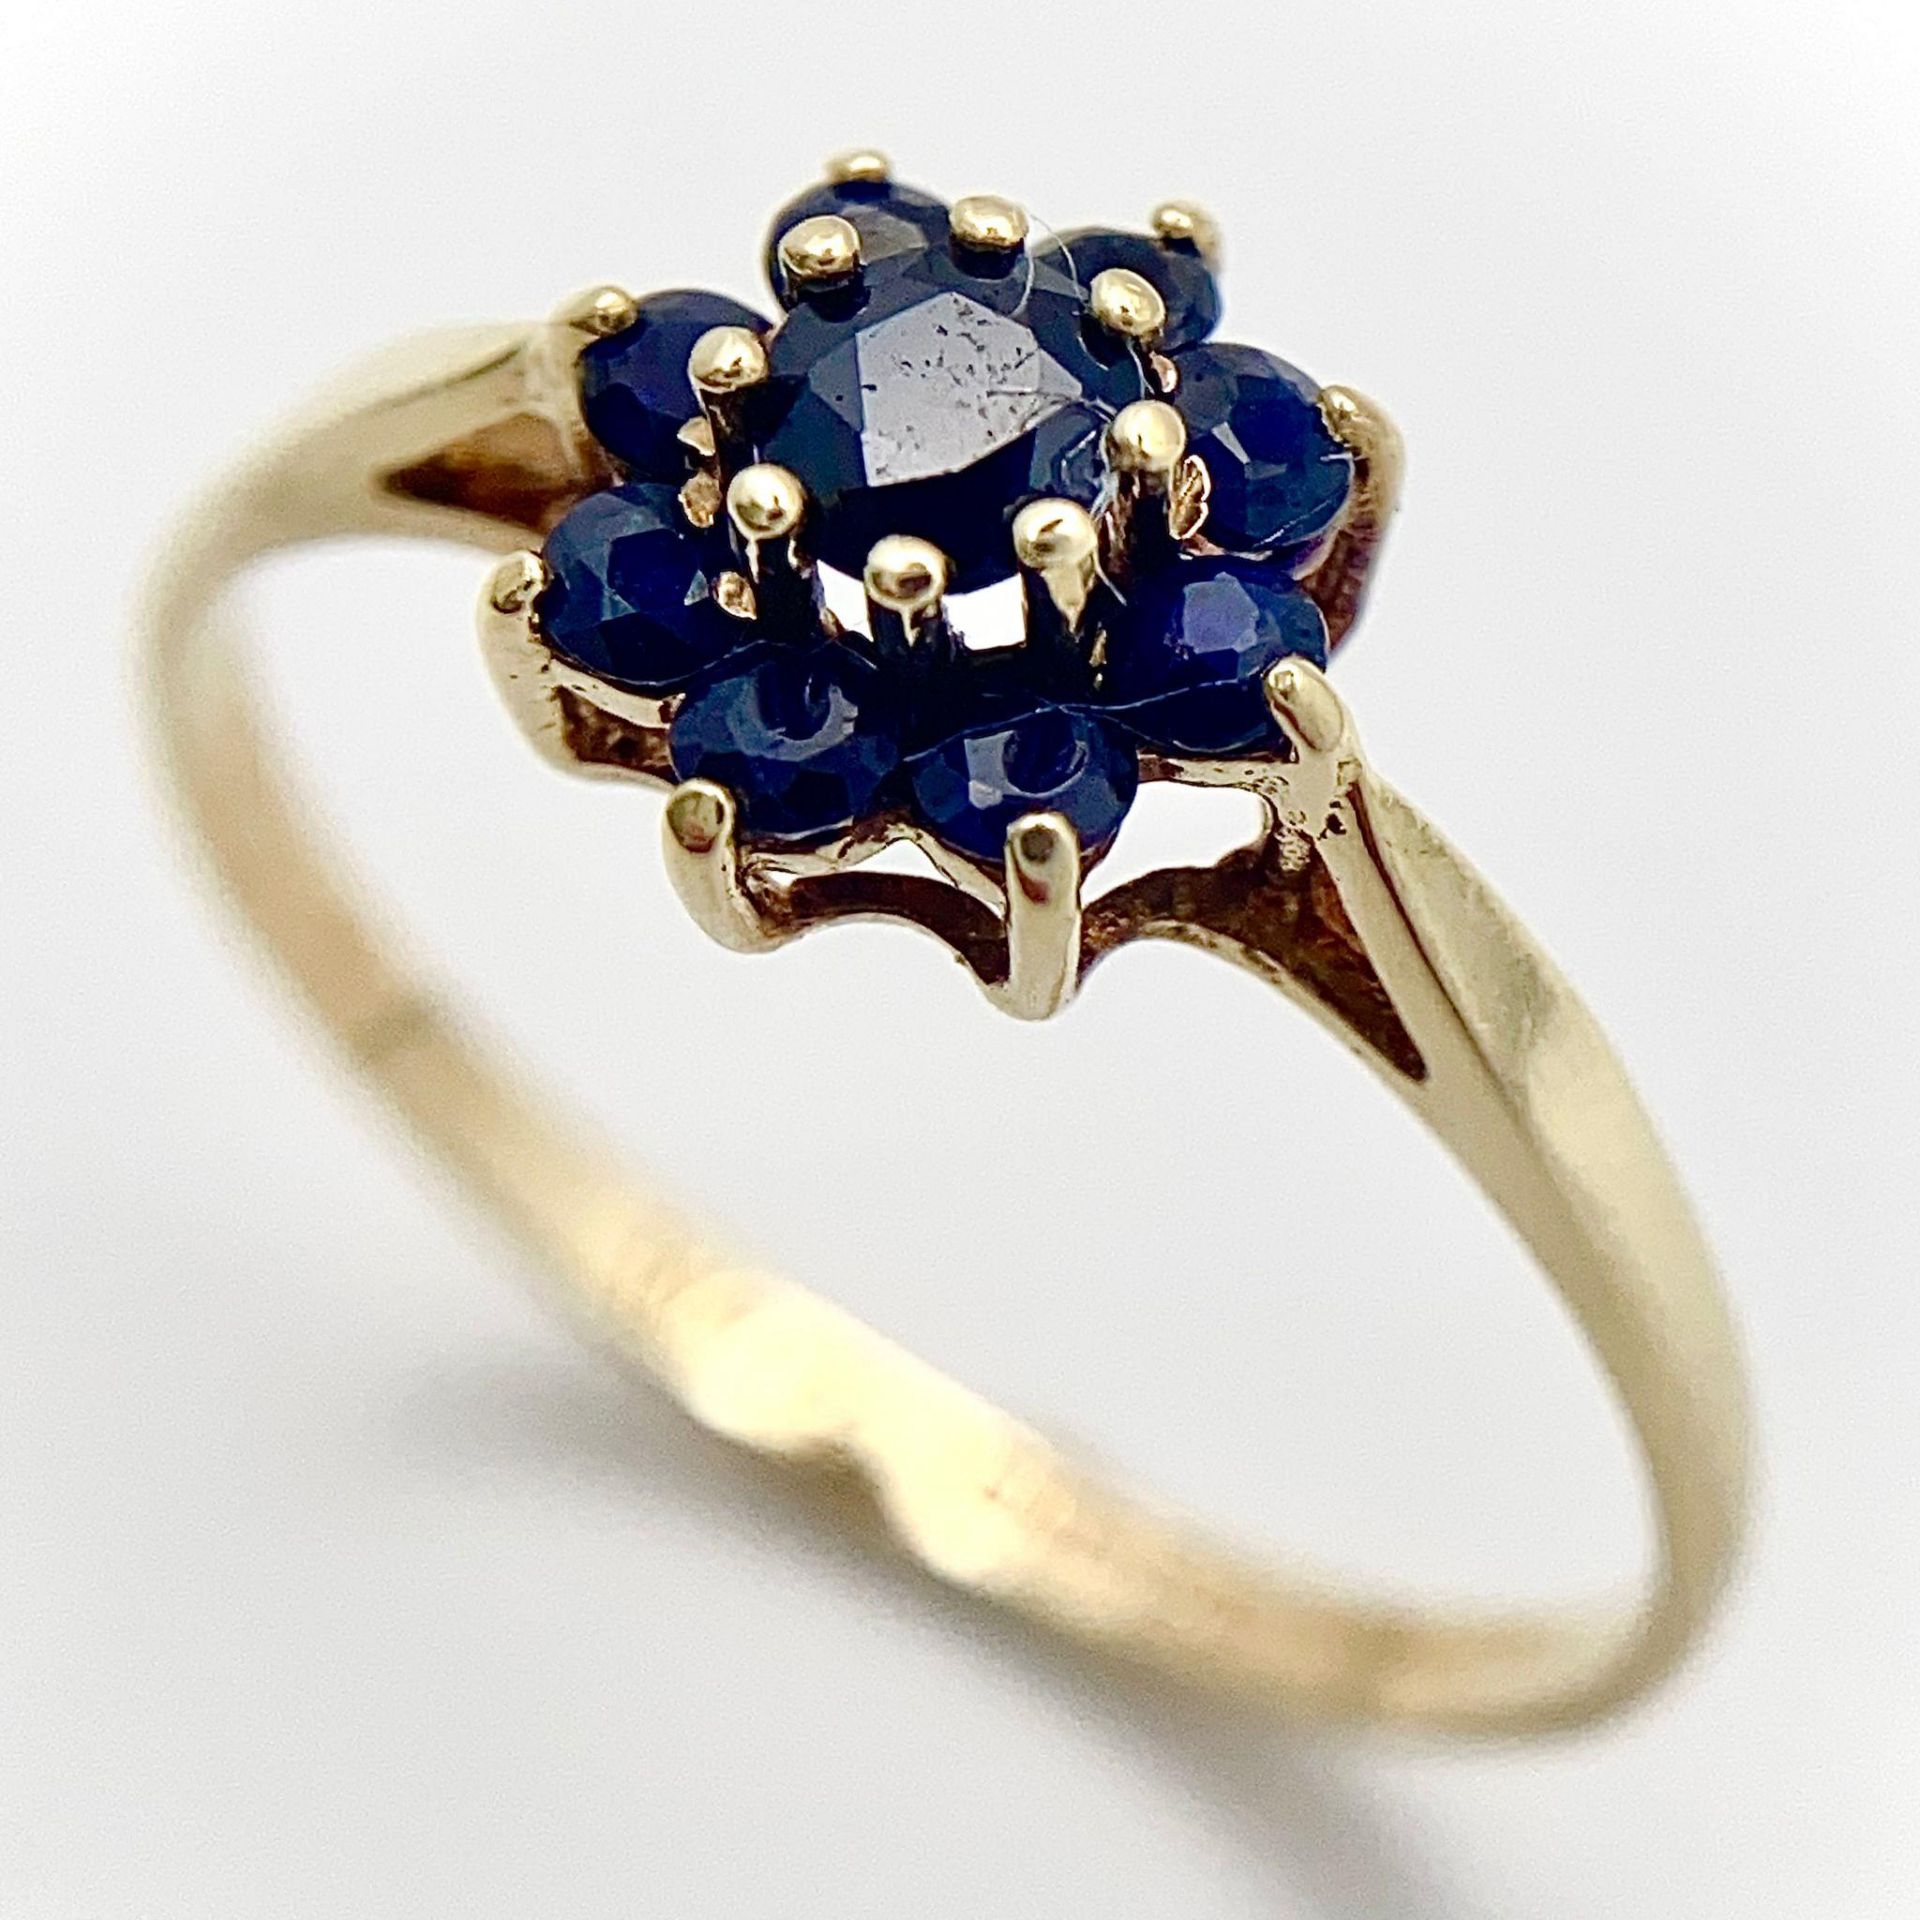 A 9K YELLOW GOLD SAPPHIRE SET CLUSTER RING. 1.3G. SIZE Q. - Image 5 of 9